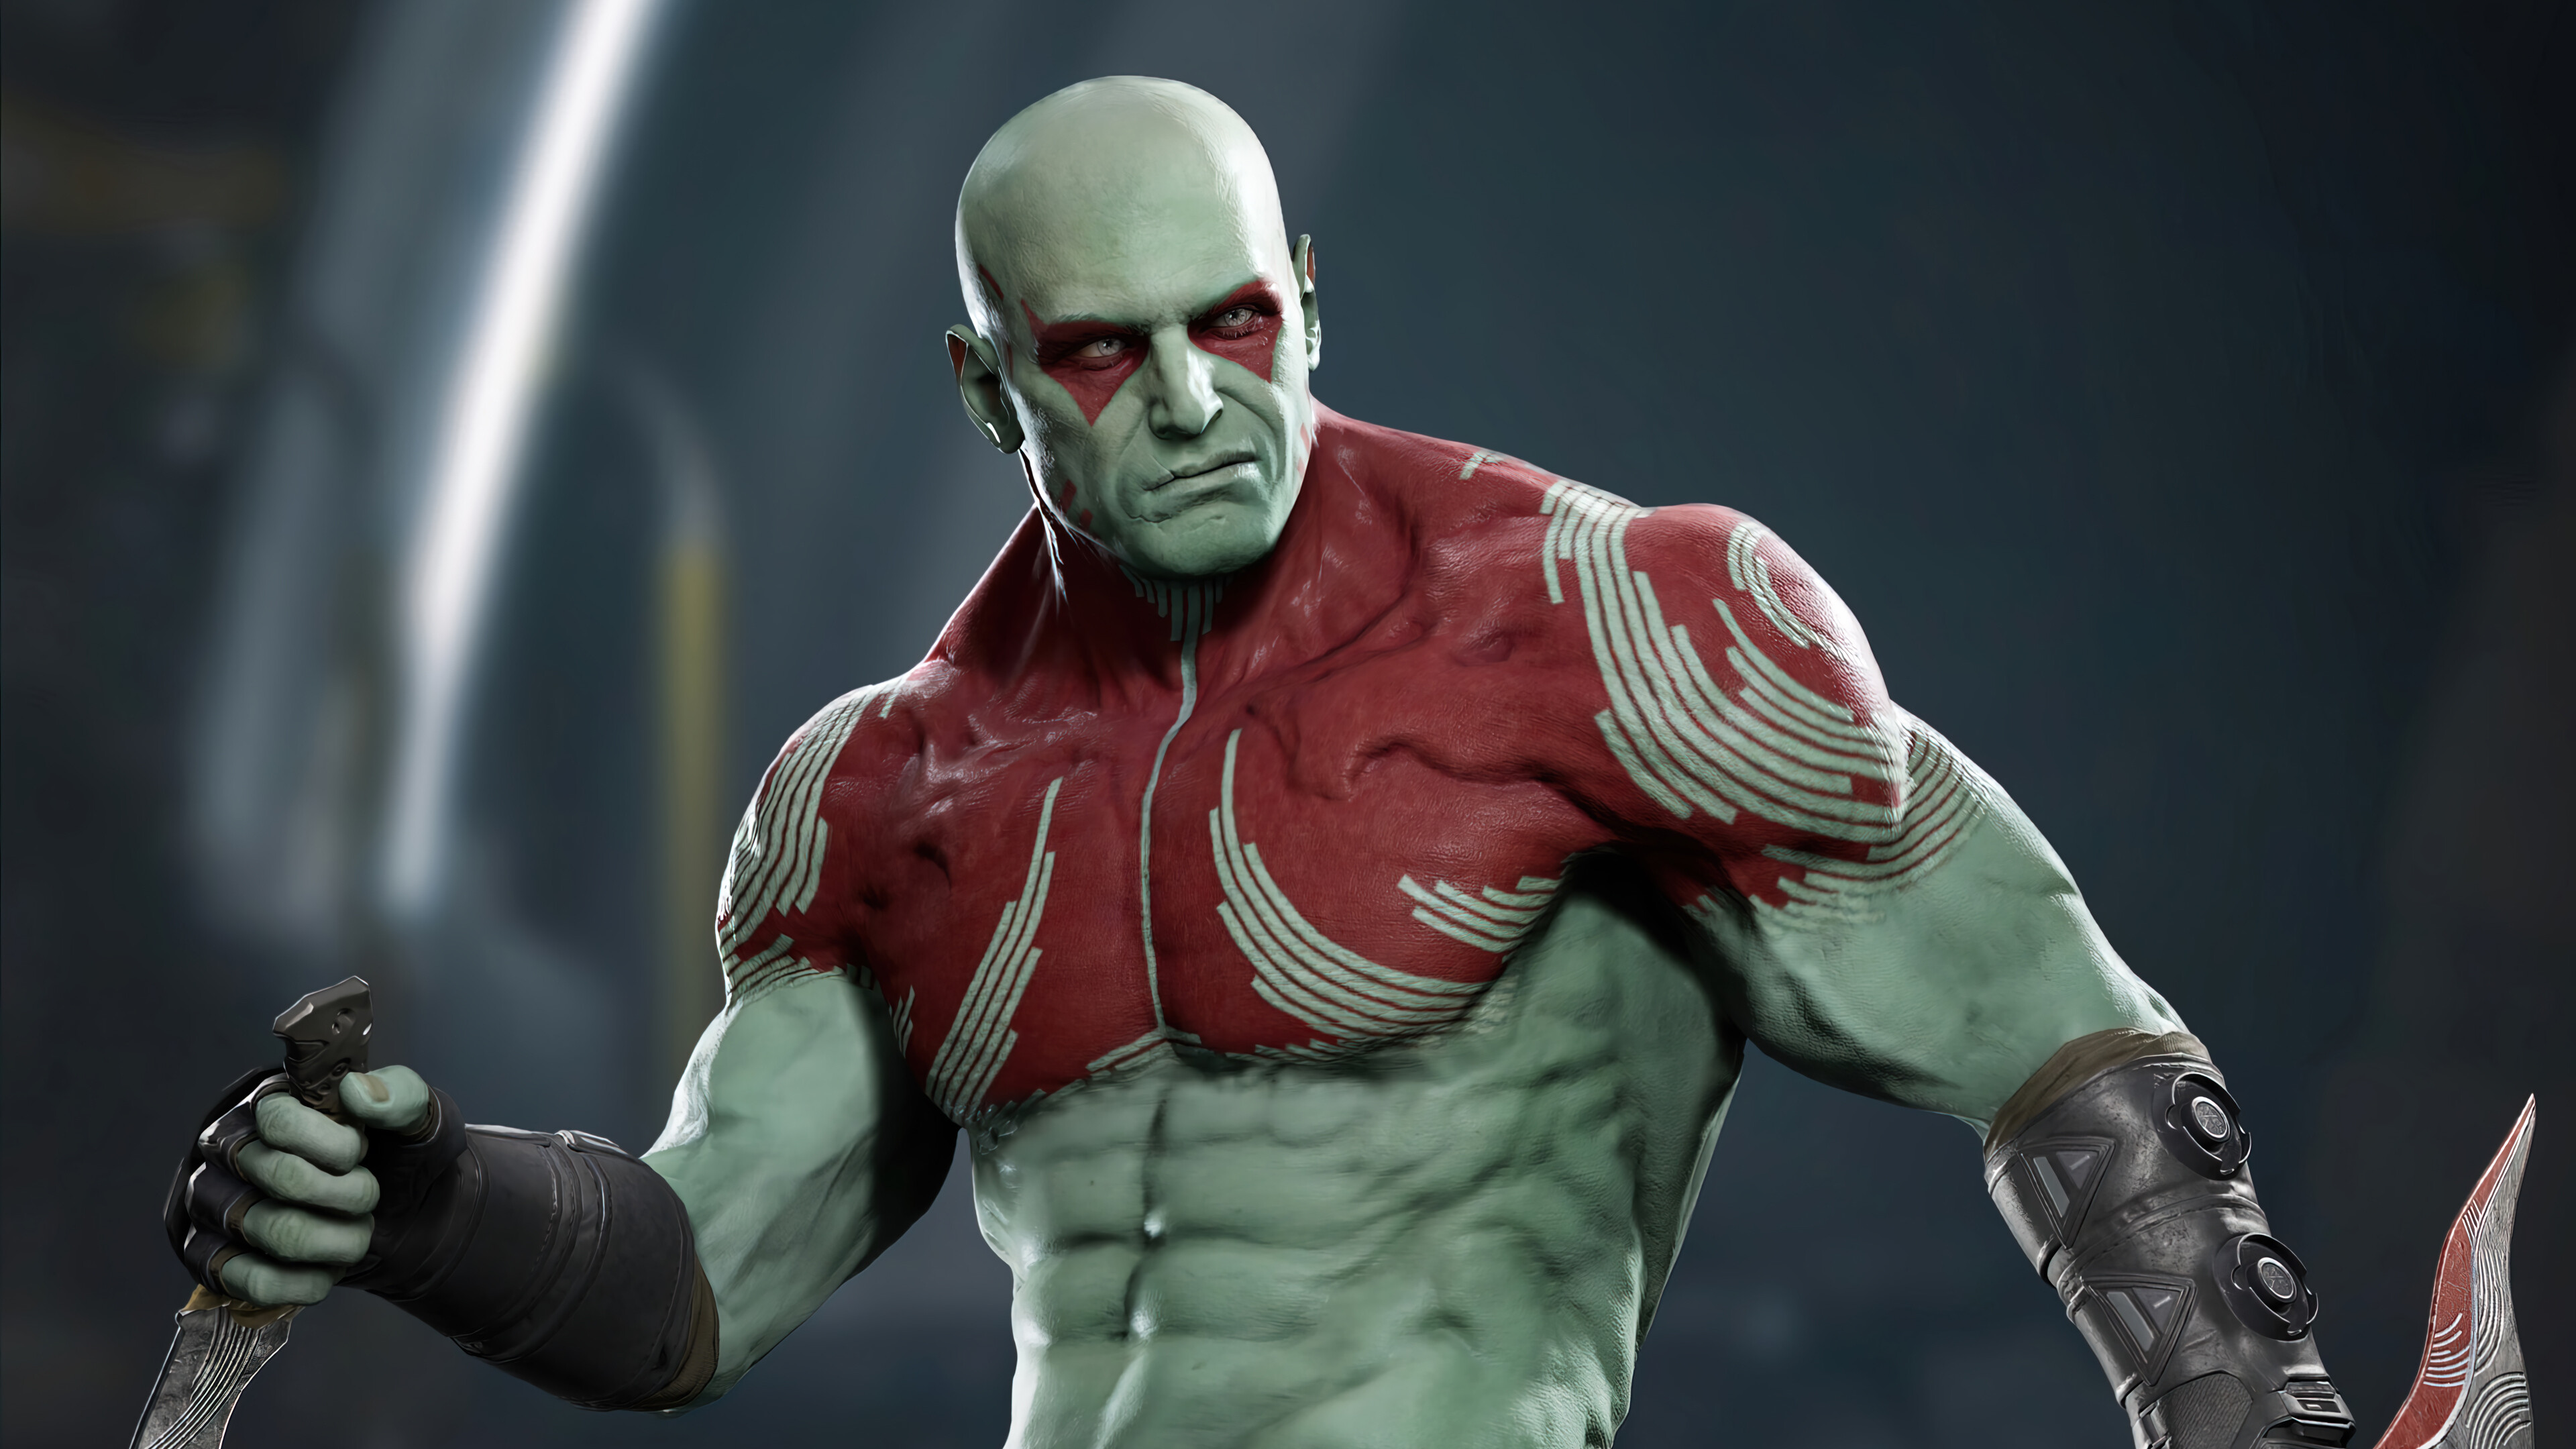 Marvel's Guardians of the Galaxy: Drax can easily stagger enemies, Superhero video game. 3840x2160 4K Wallpaper.